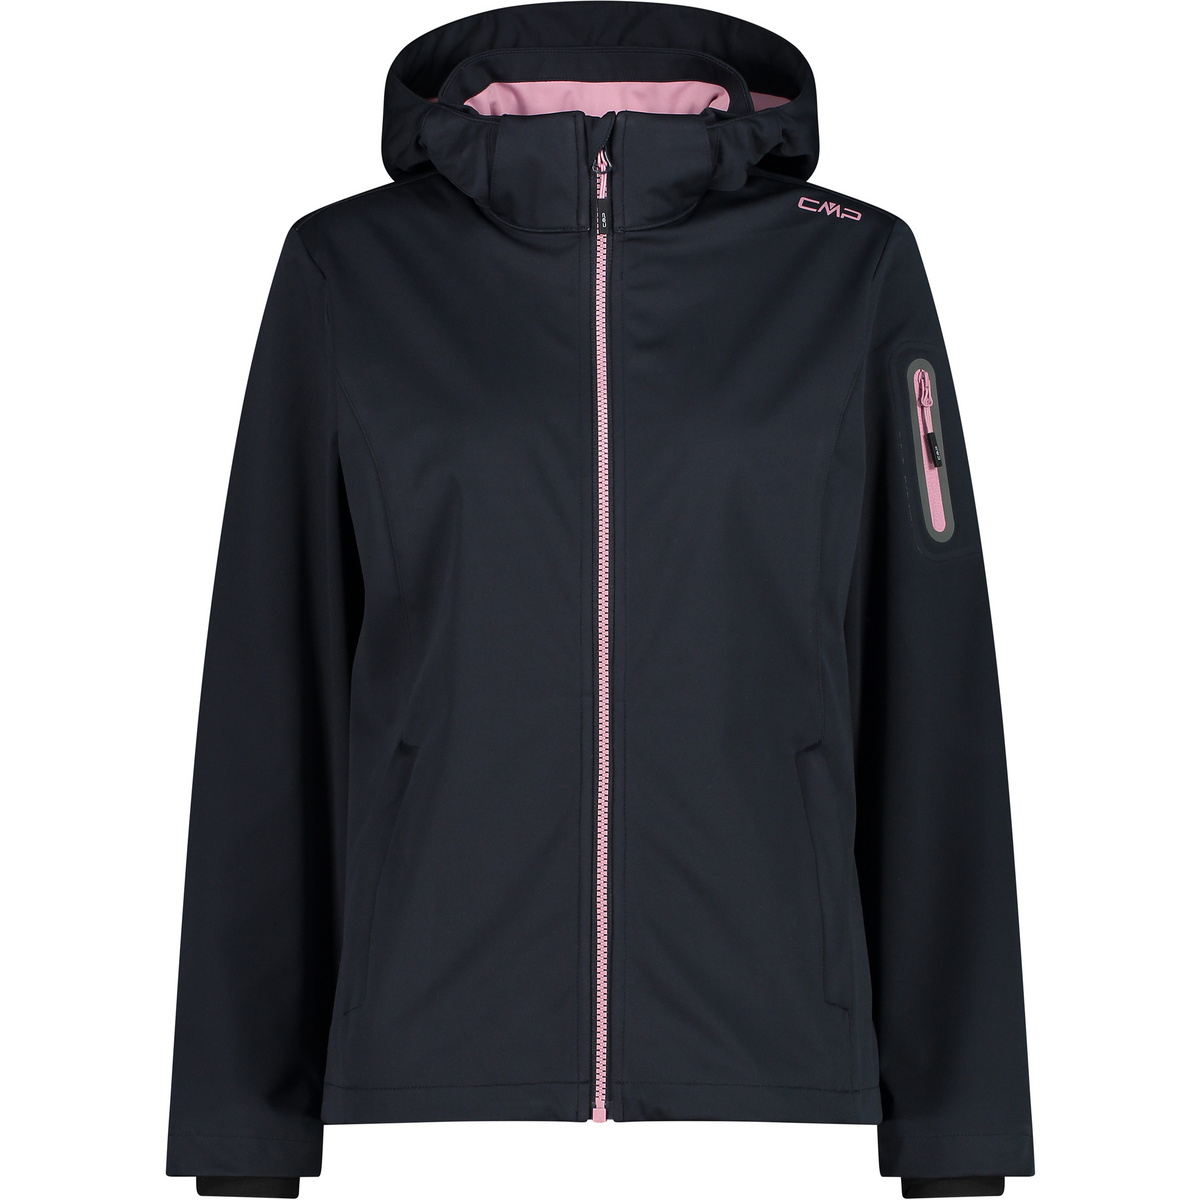 Image of CMP Donna Giacca Hoodie Zip